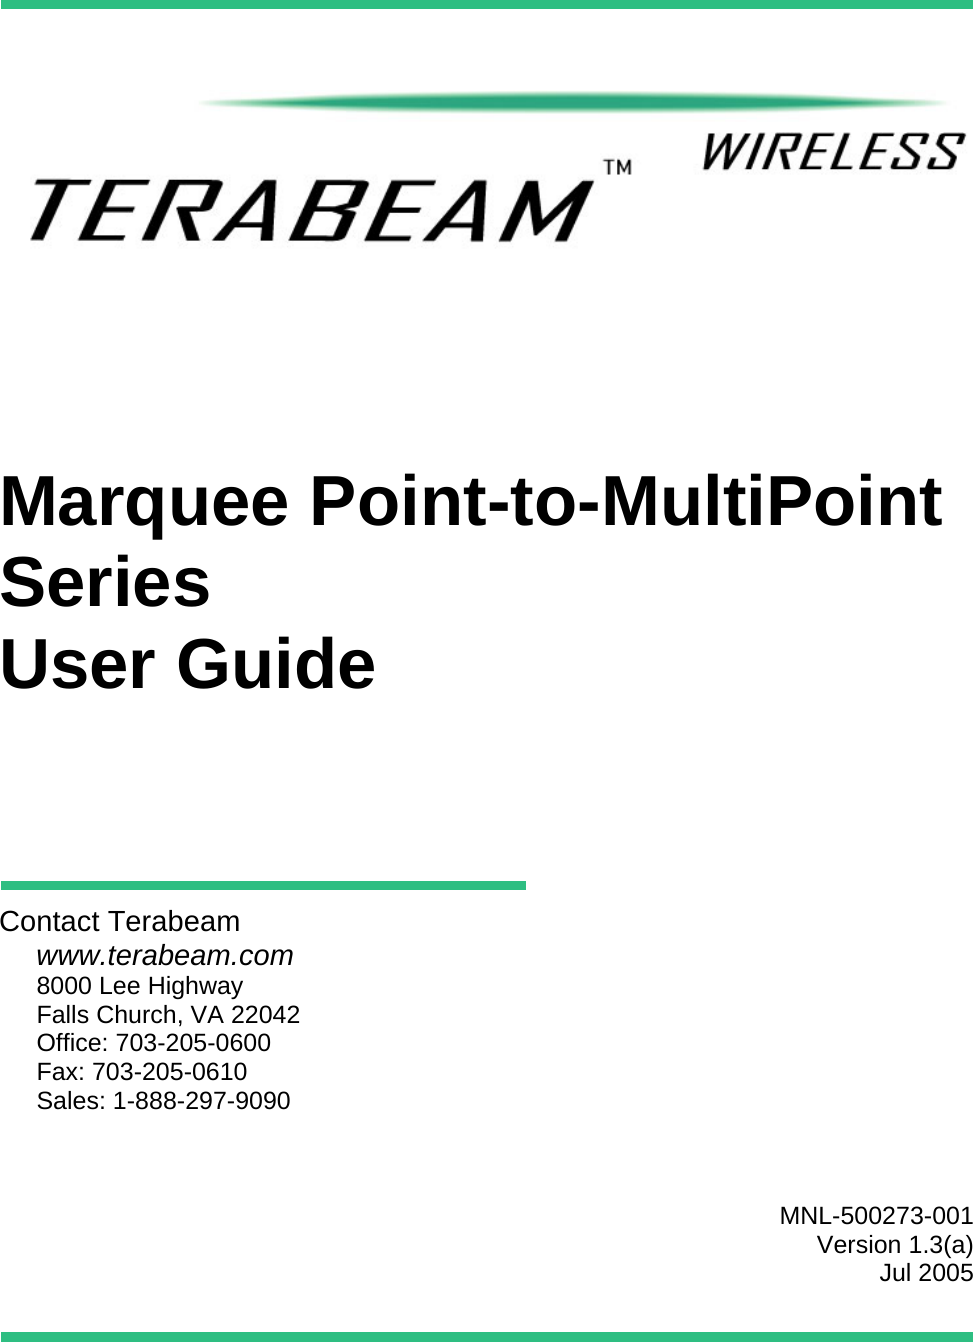            Marquee Point-to-MultiPoint Series User Guide        Contact Terabeam www.terabeam.com 8000 Lee Highway Falls Church, VA 22042 Office: 703-205-0600 Fax: 703-205-0610 Sales: 1-888-297-9090     MNL-500273-001 Version 1.3(a) Jul 2005   